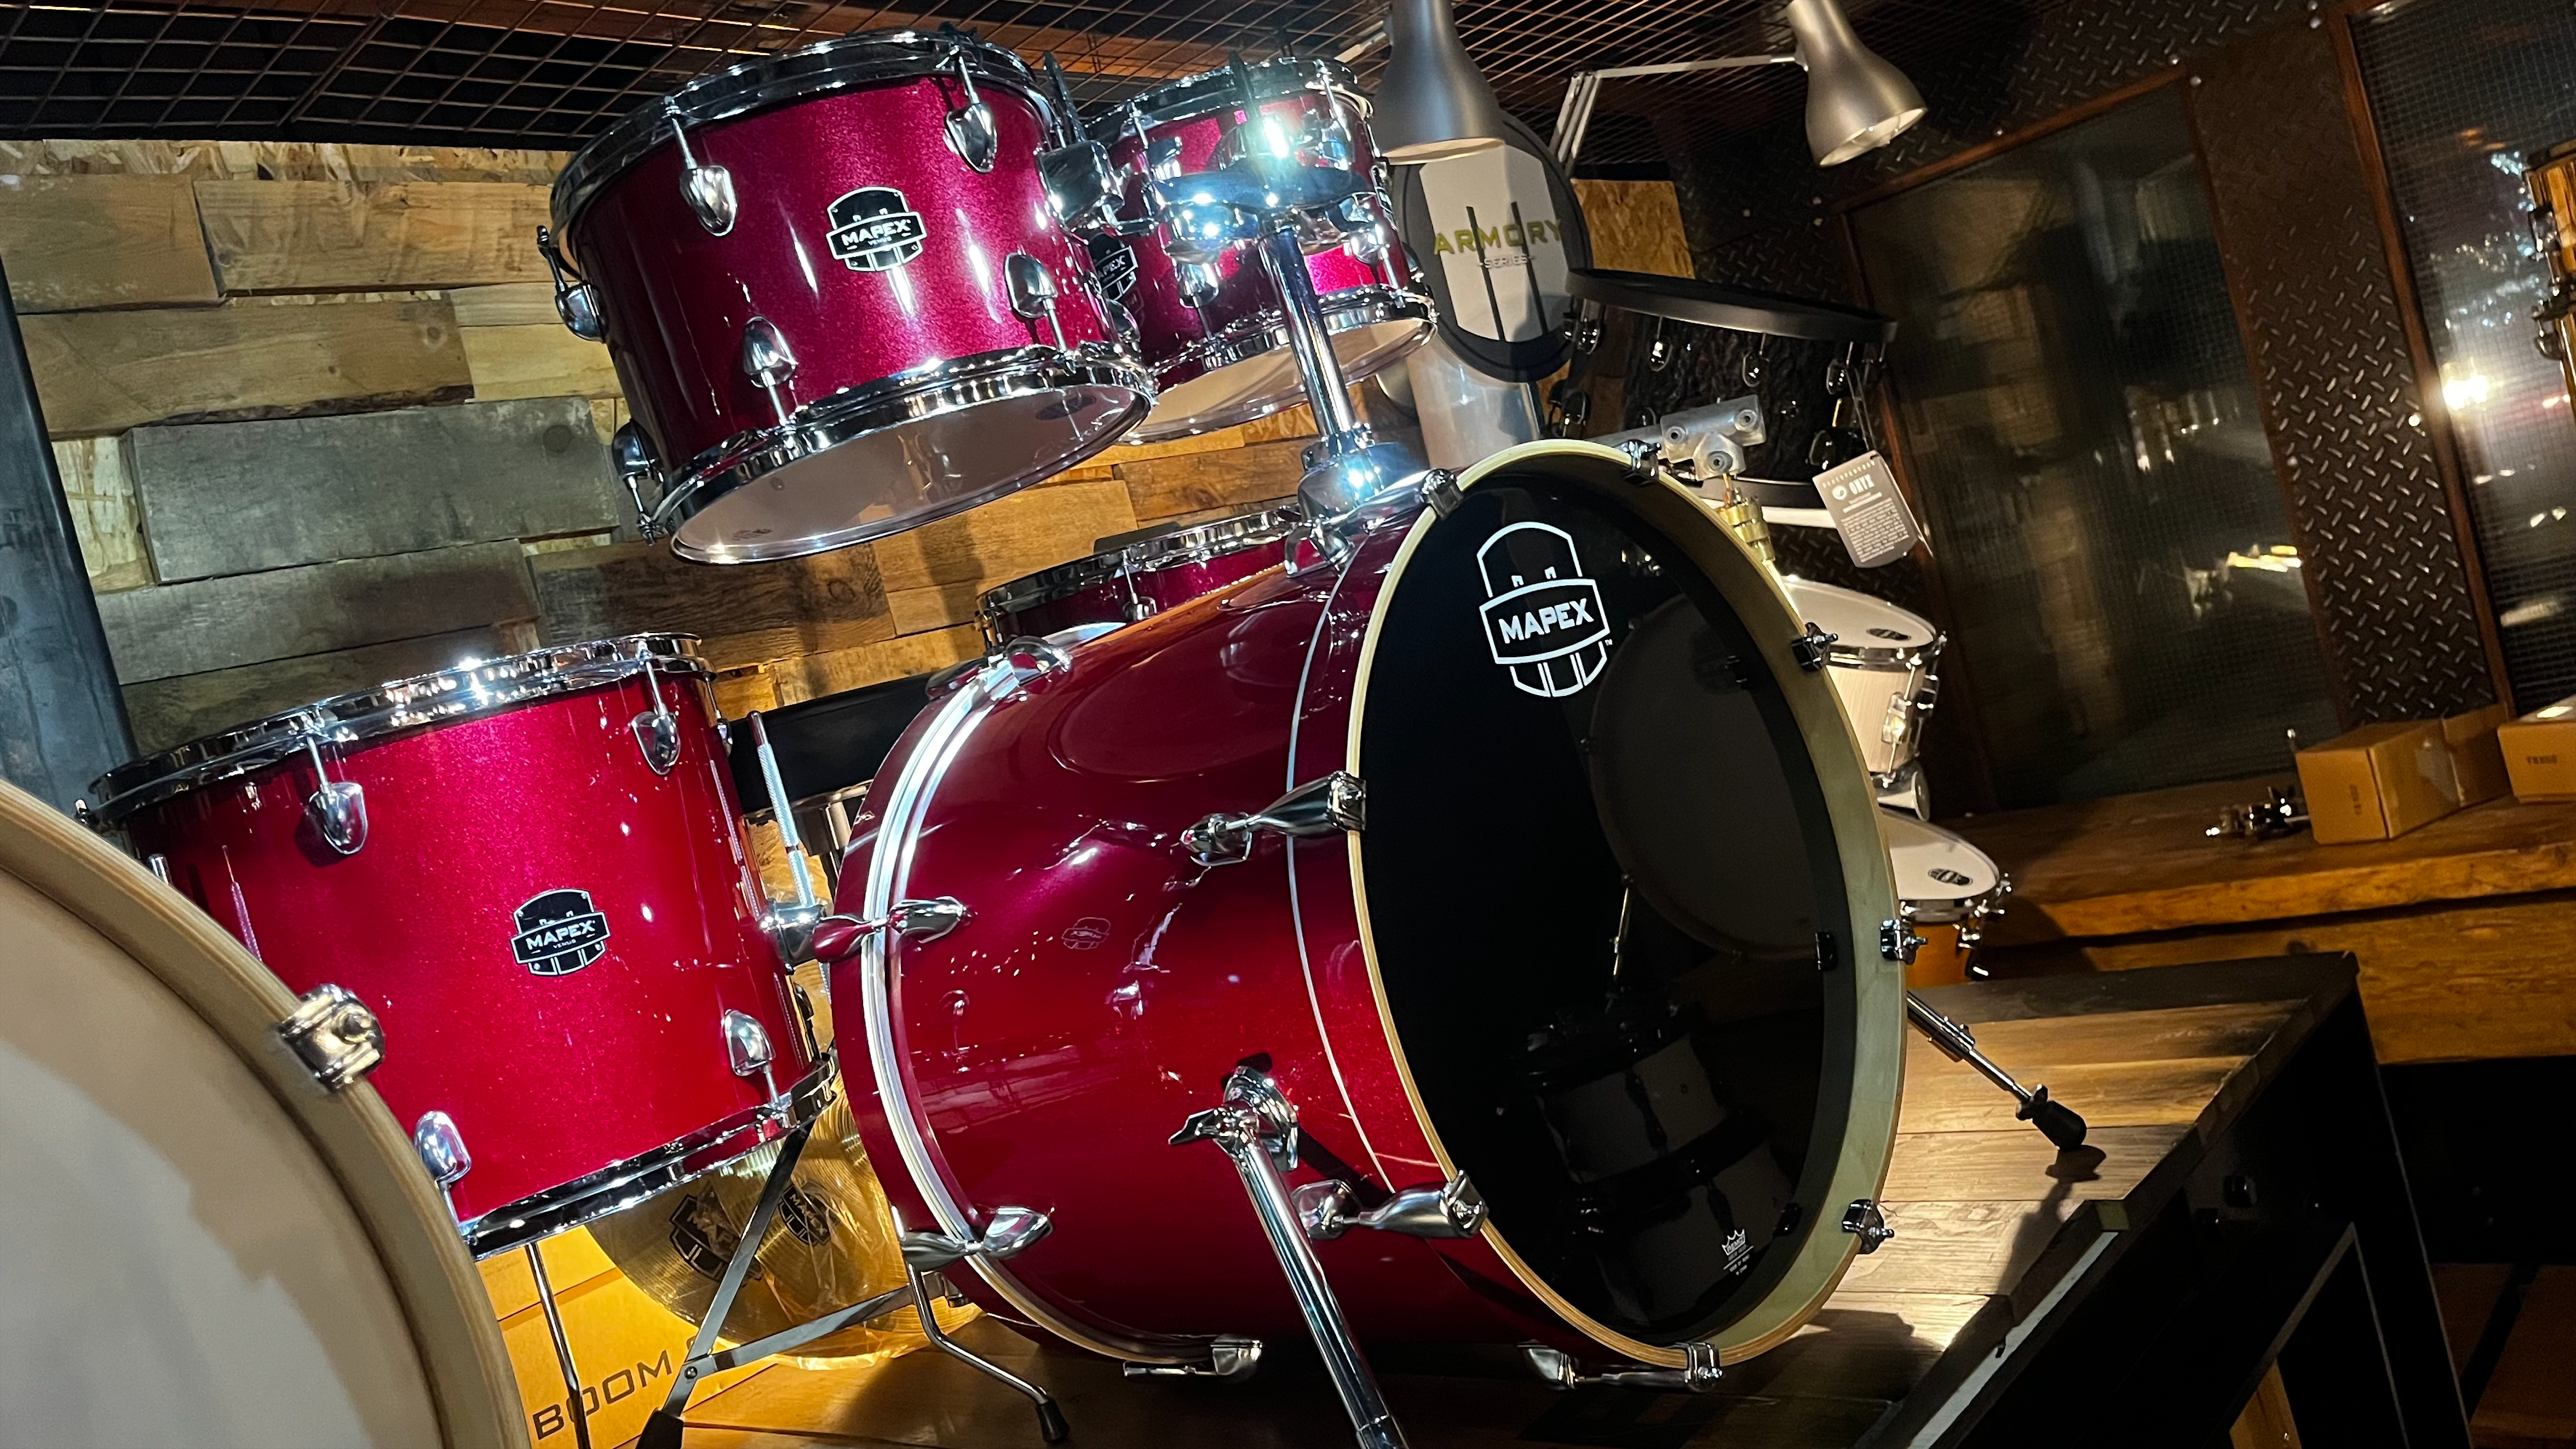 Mapex drum kit with a sparkly red finish and wood hoops